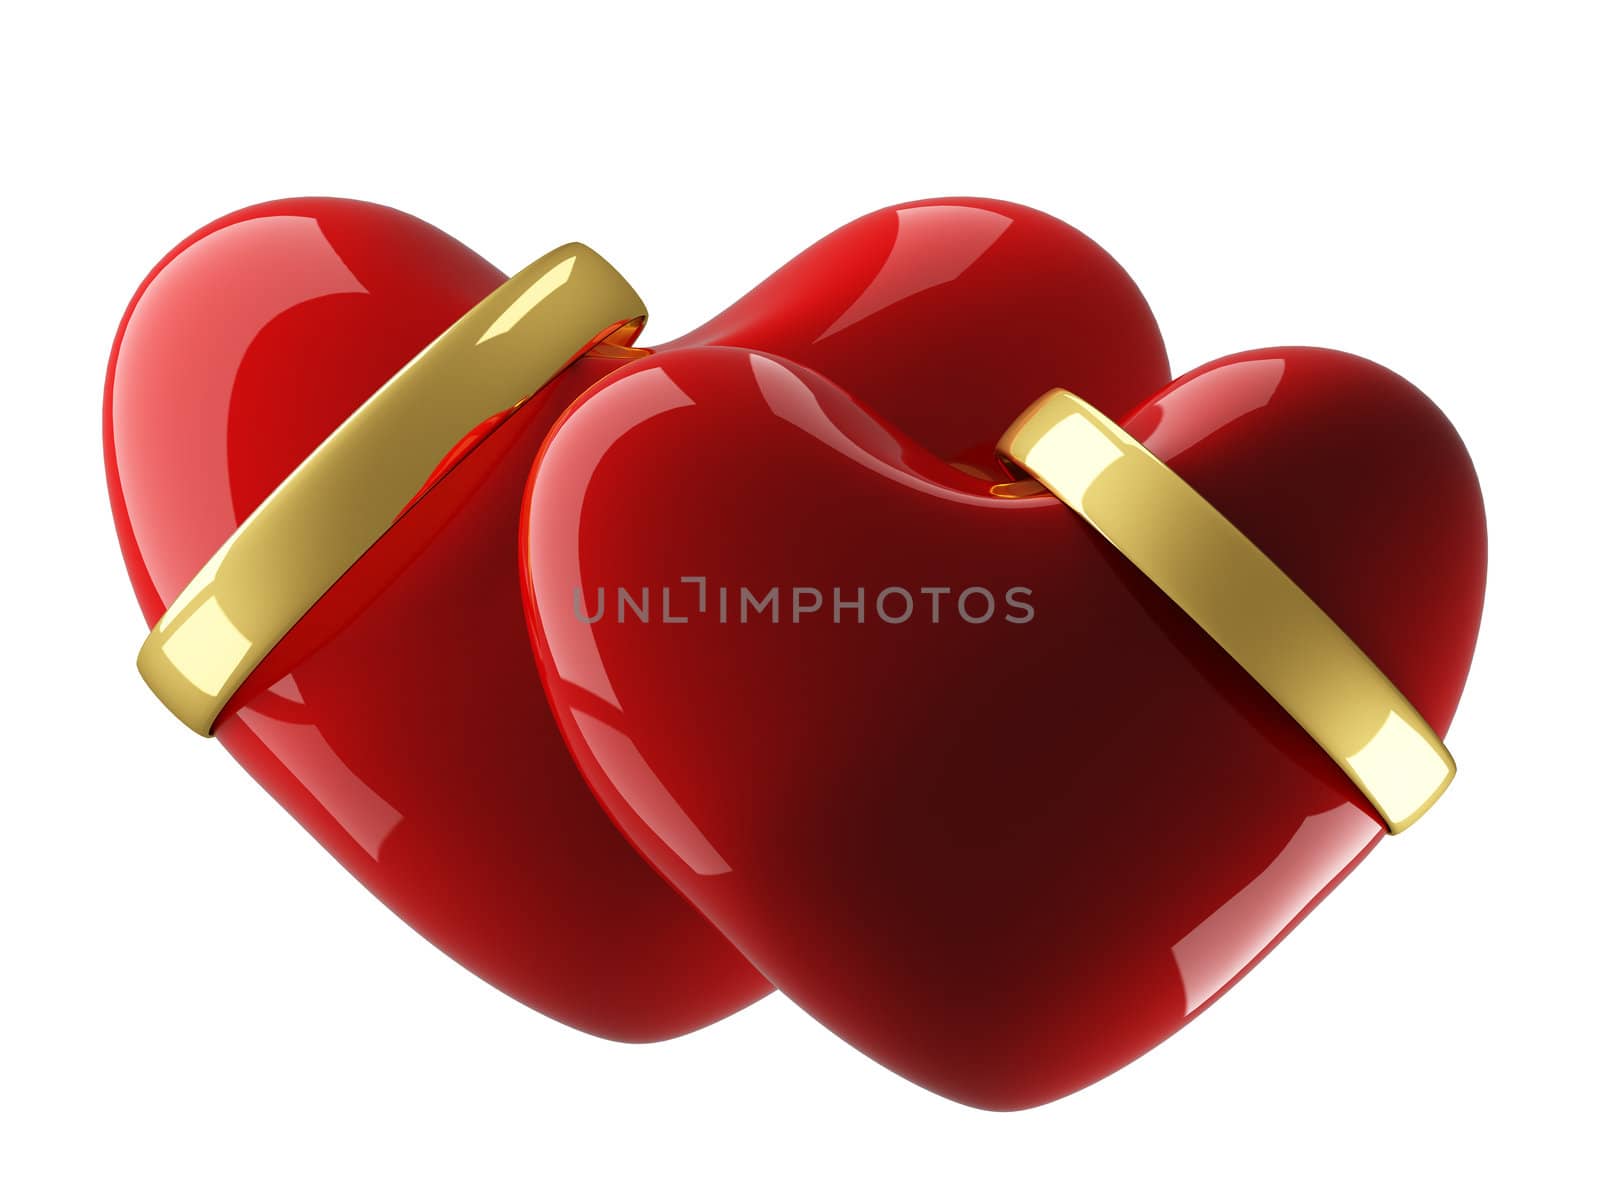 Two heart with wedding rings on a white background. 3D image.